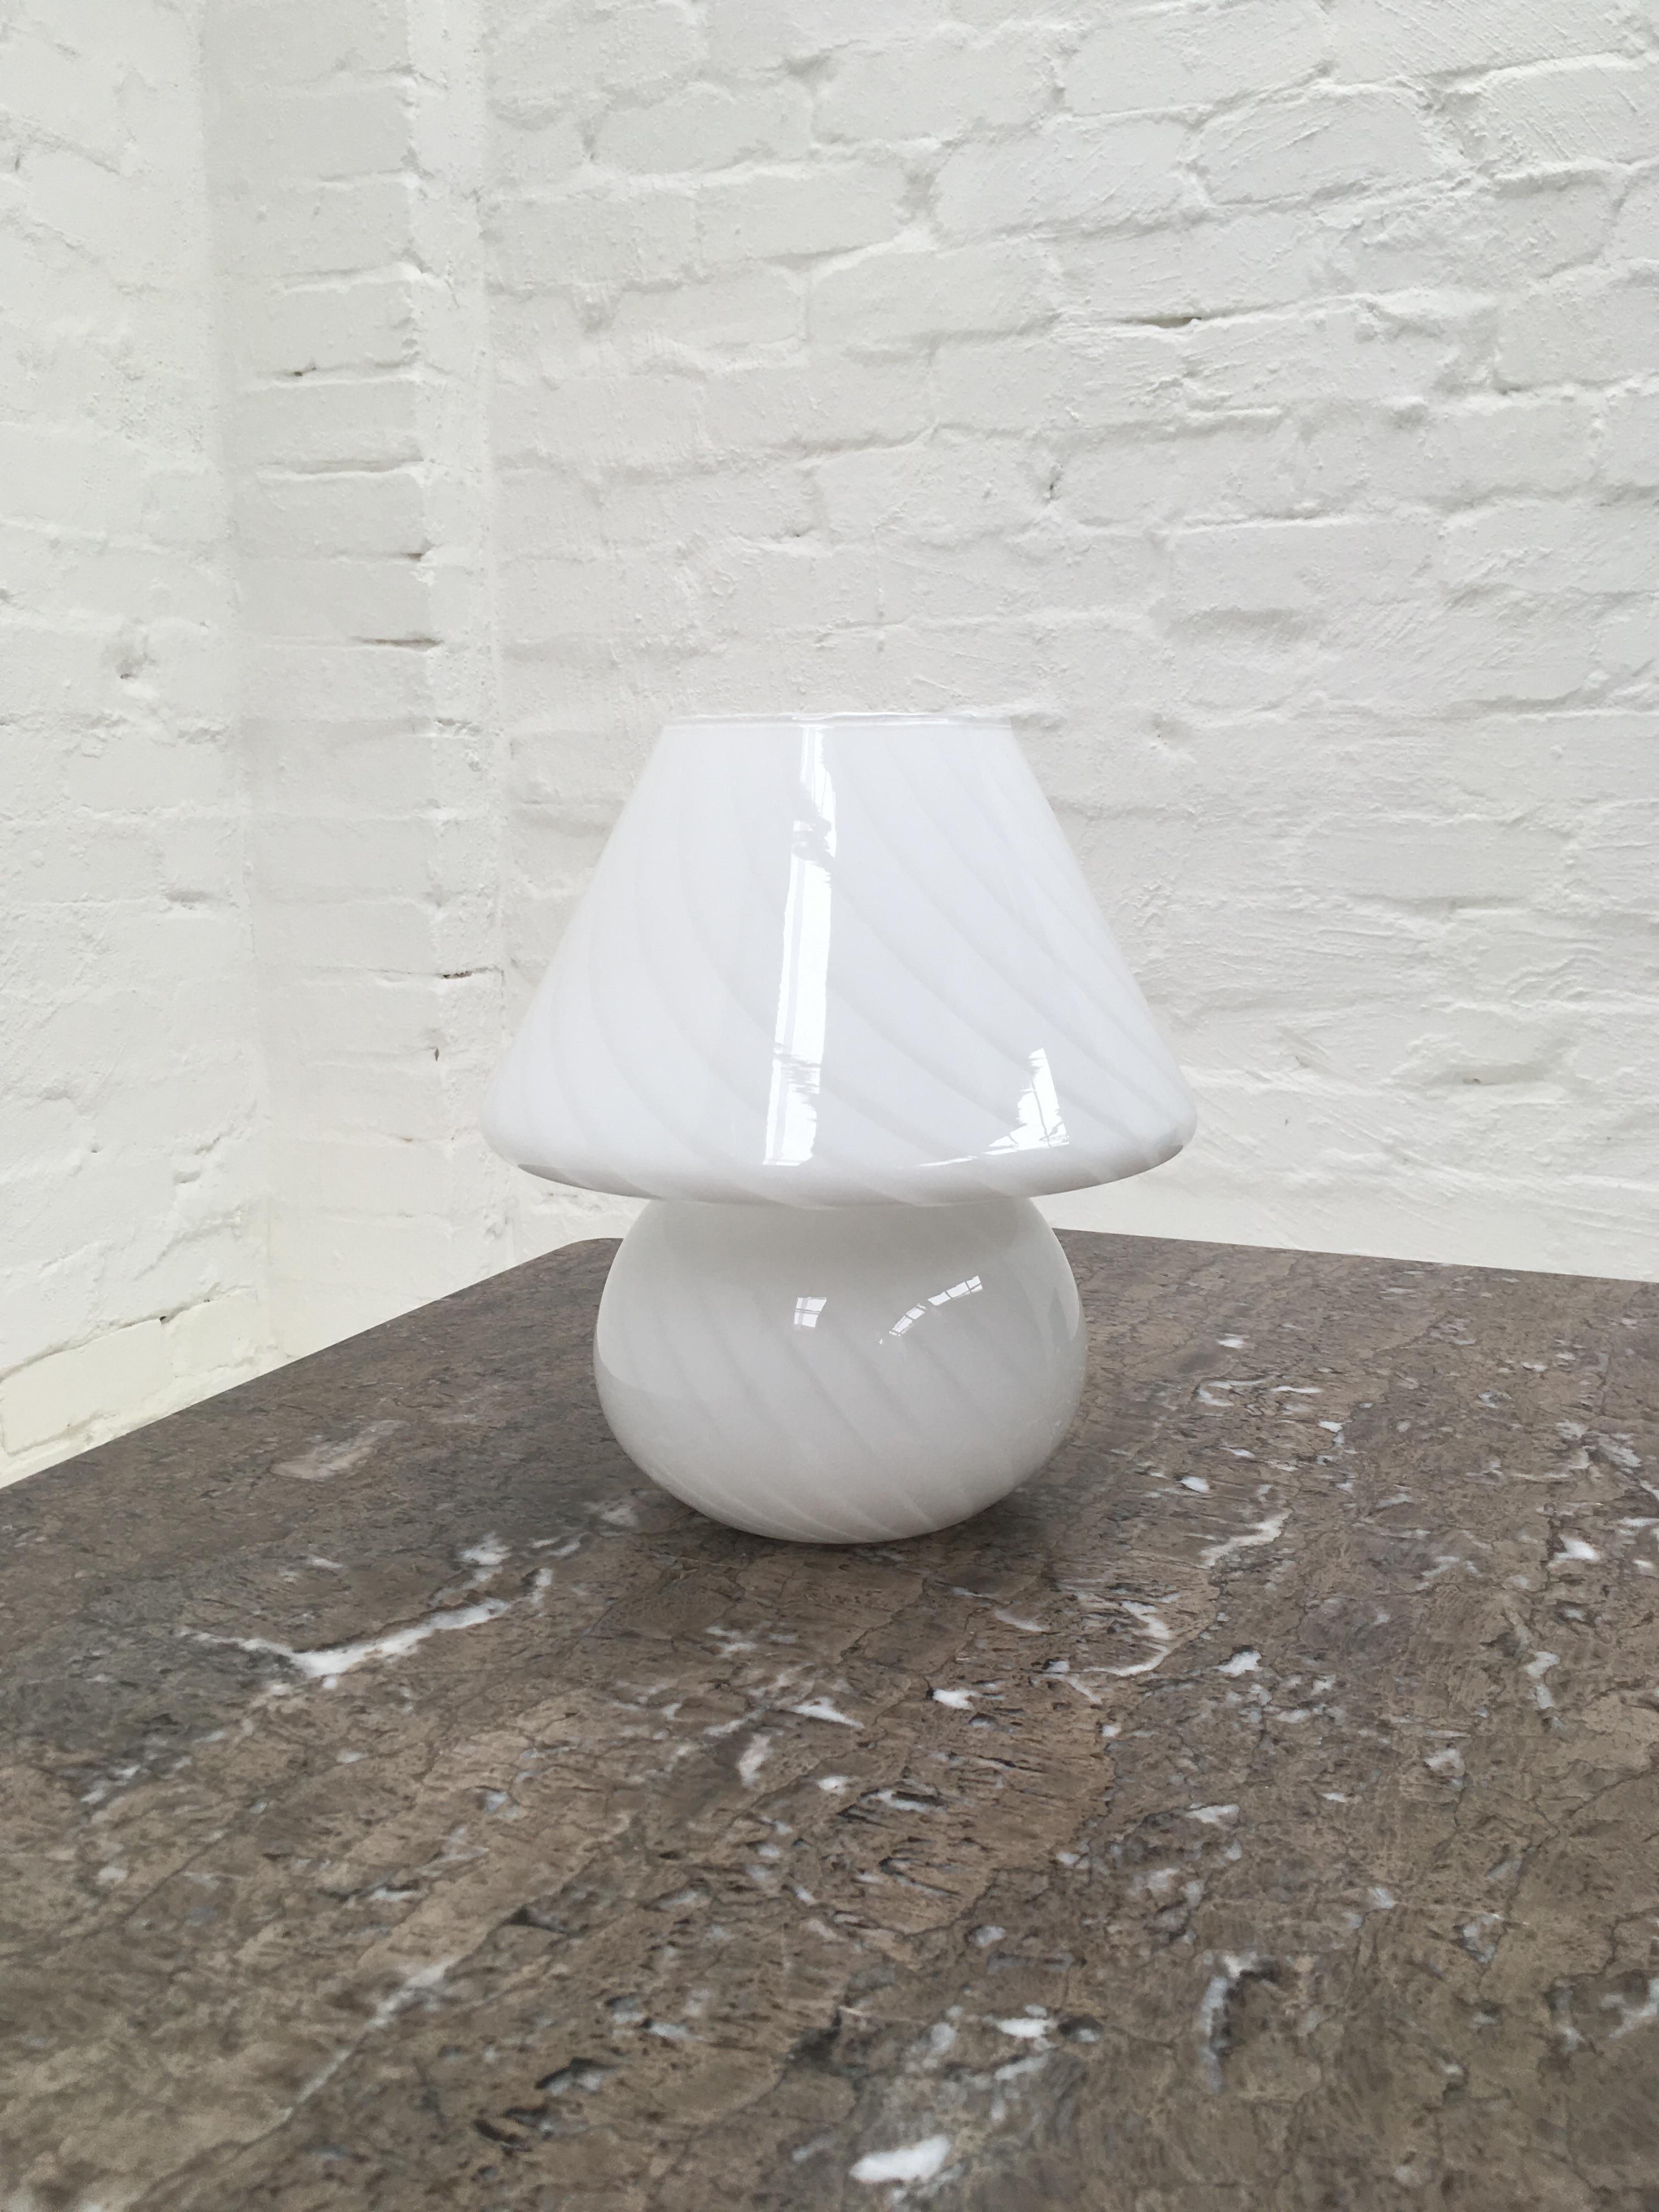 A medium to large size Classic Murano mushroom lamp. A most attractive off-white color.

These lamps were produced in the 1960s and 1970s by many of the Murano glass producers as a communal design, sold simply as ‘Vetri Murano’ or Murano glass. If